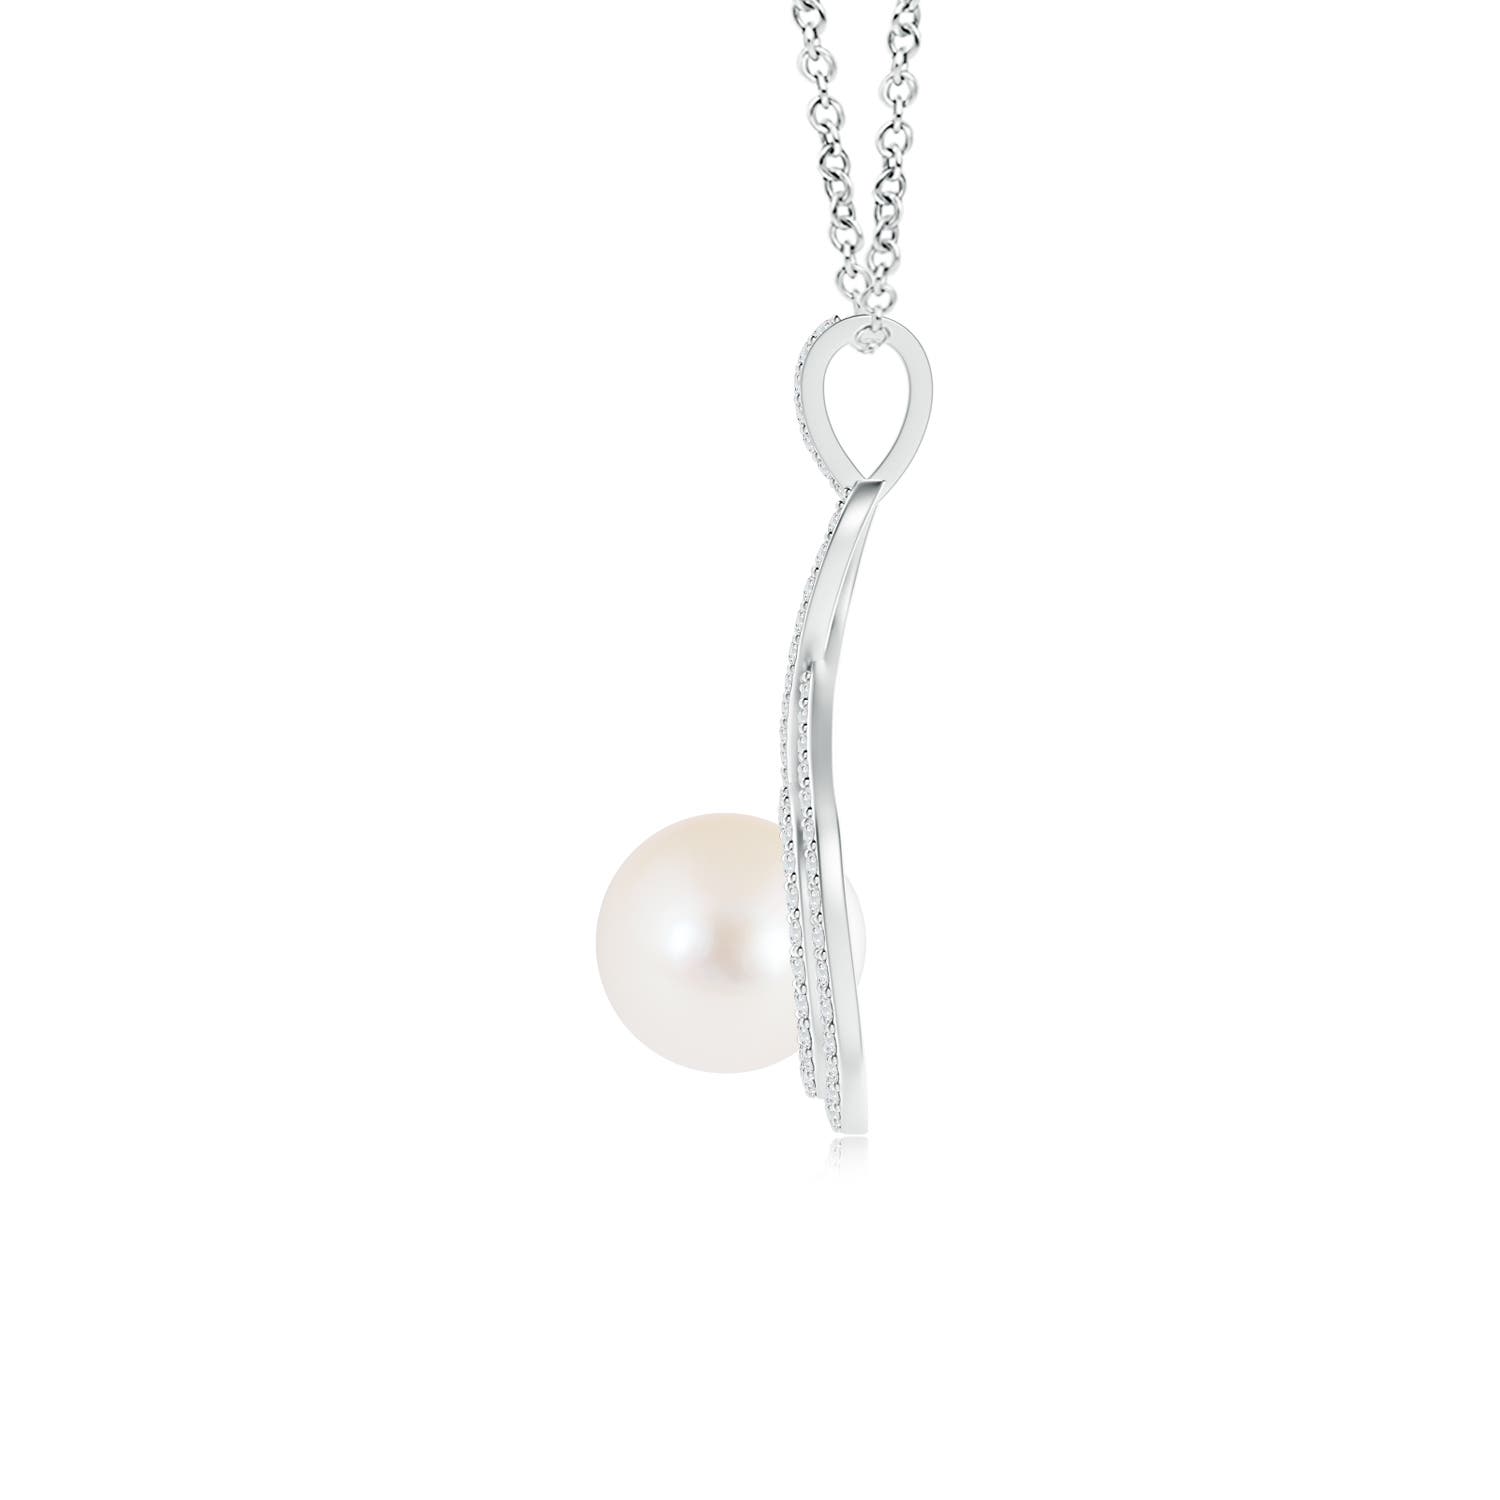 AAA - Freshwater Cultured Pearl / 4.08 CT / 14 KT White Gold